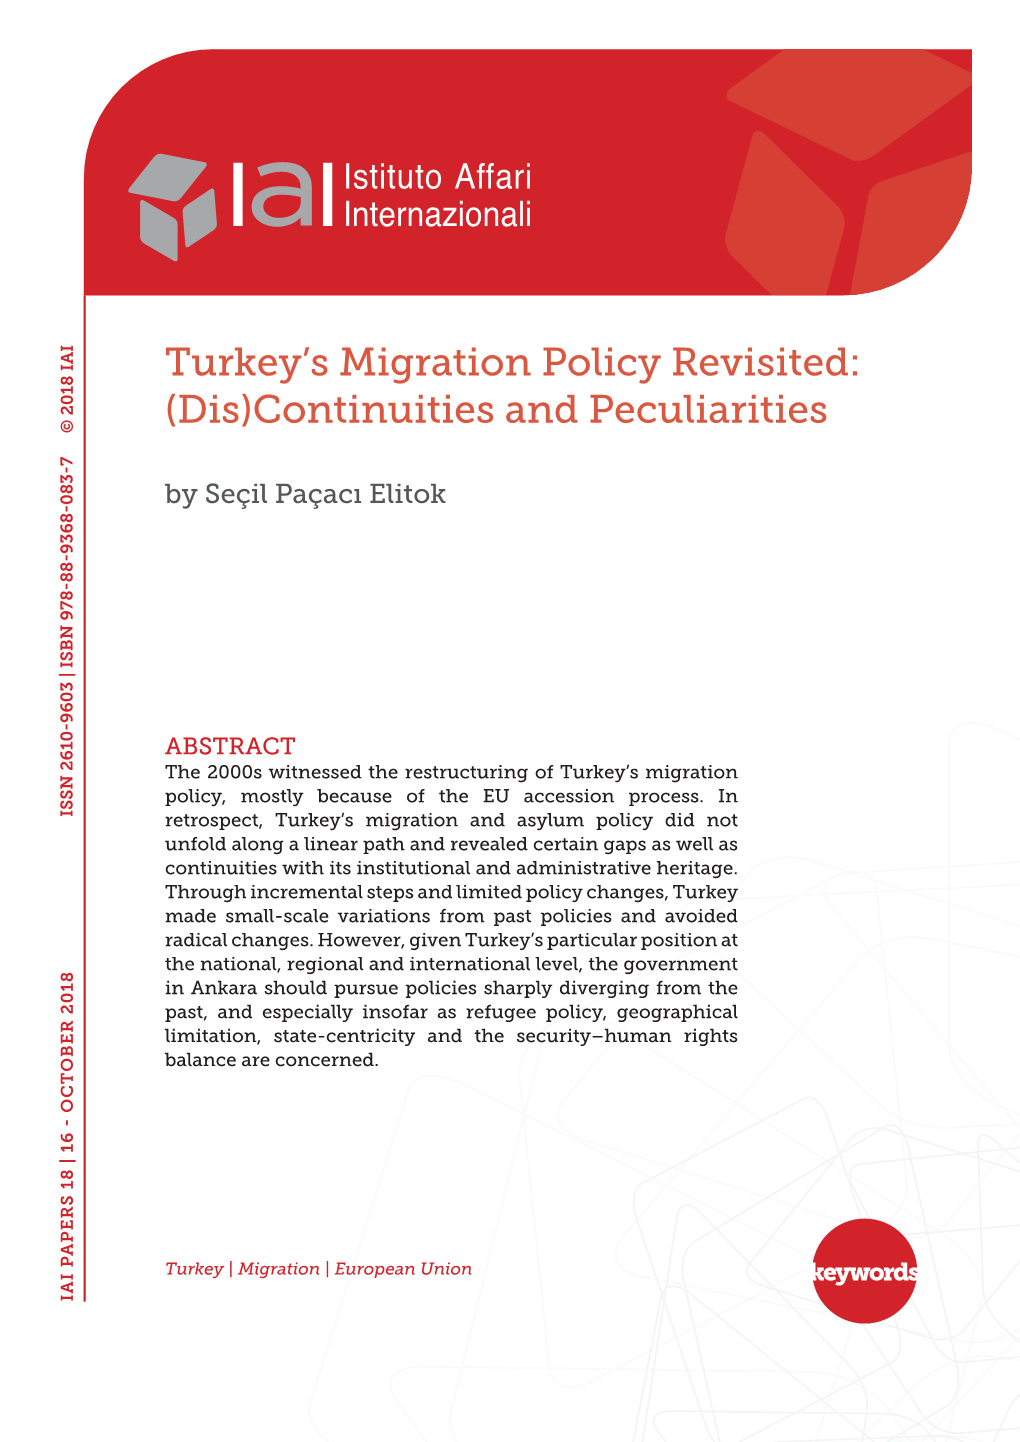 Turkey's Migration Policy Revisited: (Dis)Continuities and Peculiarities